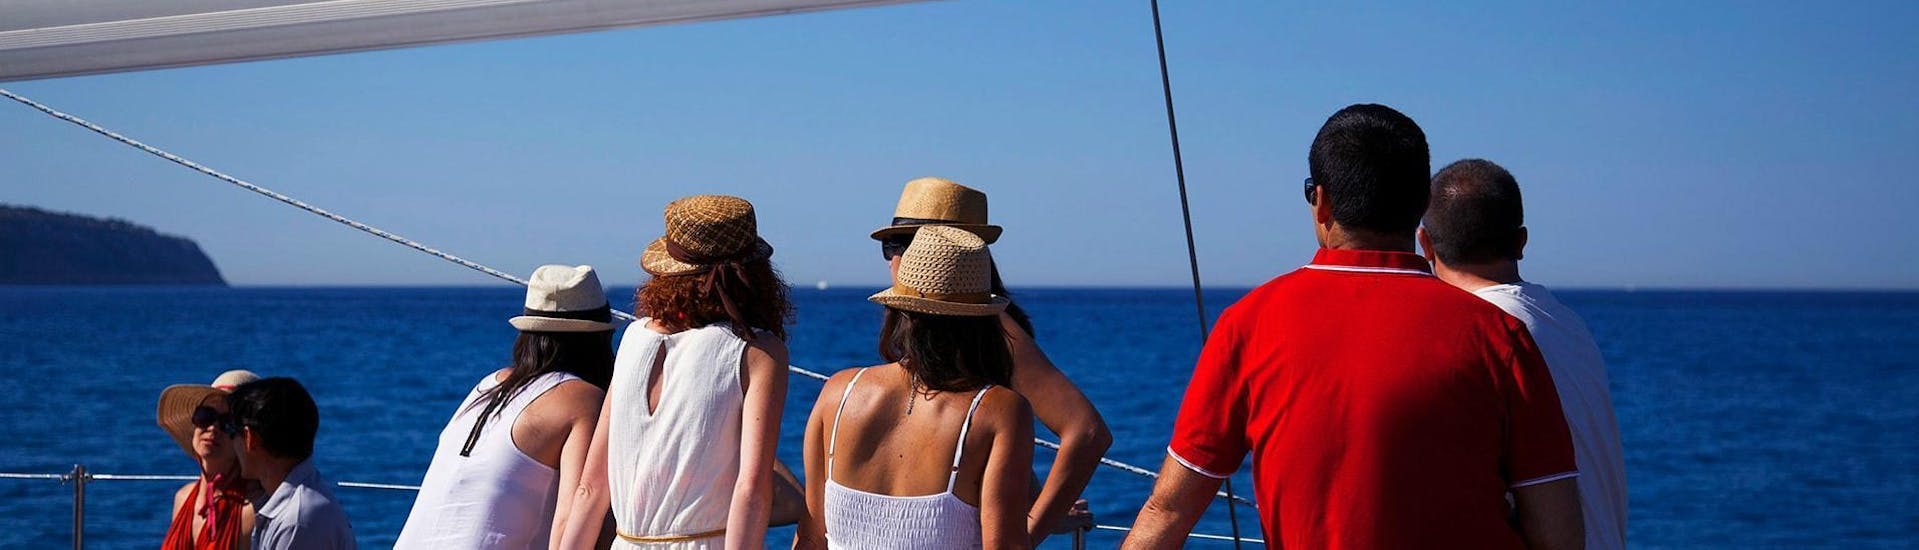 People enjoying in the boat during a Private Catamaran Trip in the Bay of Palma with Oasis Catamaran Mallorca.